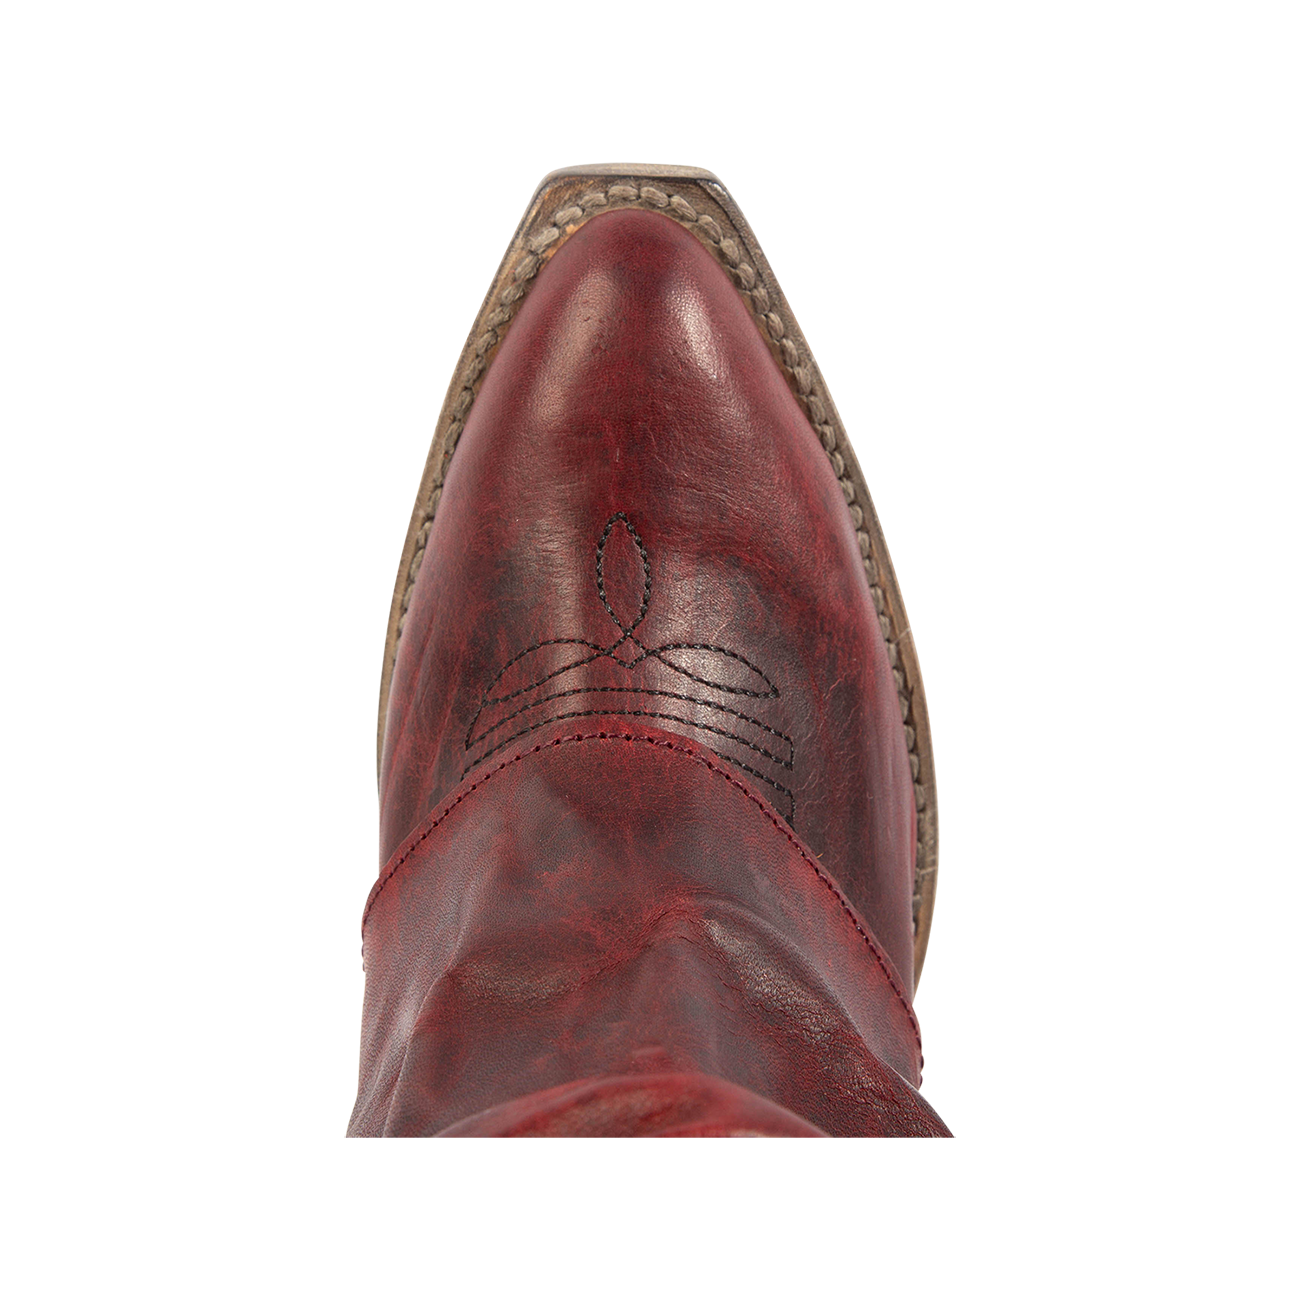 Top view showing pointed toe with decorative stitching on FREEBIRD women's Jules wine leather high flare heel western boot